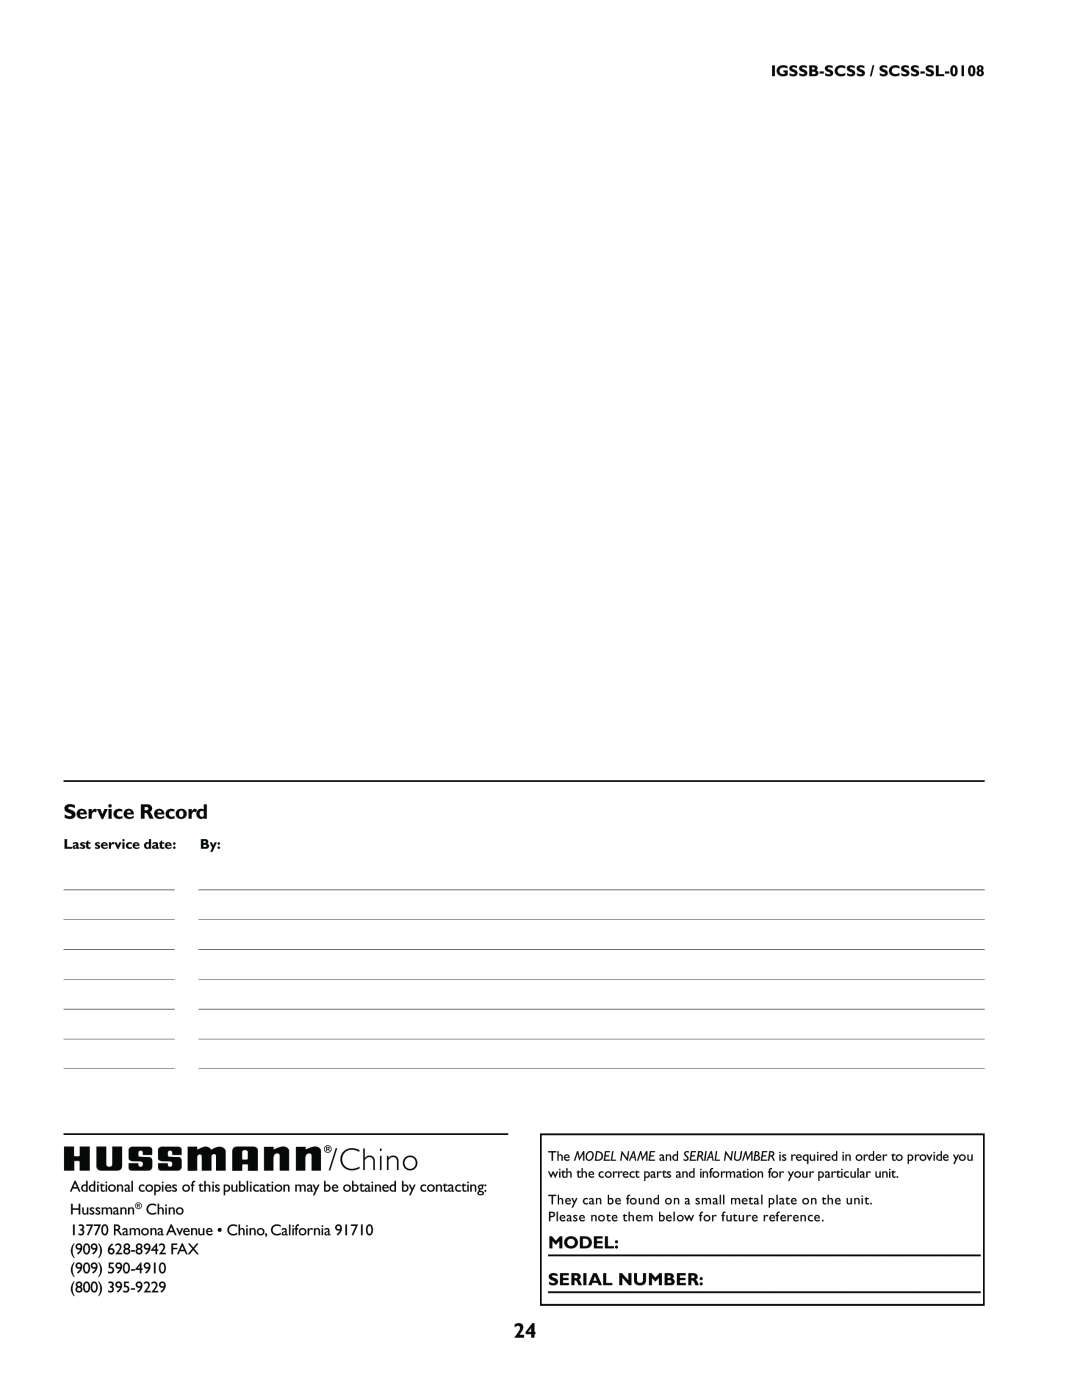 hussman manual Service Record, Chino, Model Serial Number, IGSSB-SCSS / SCSS-SL-0108, Last service date By 